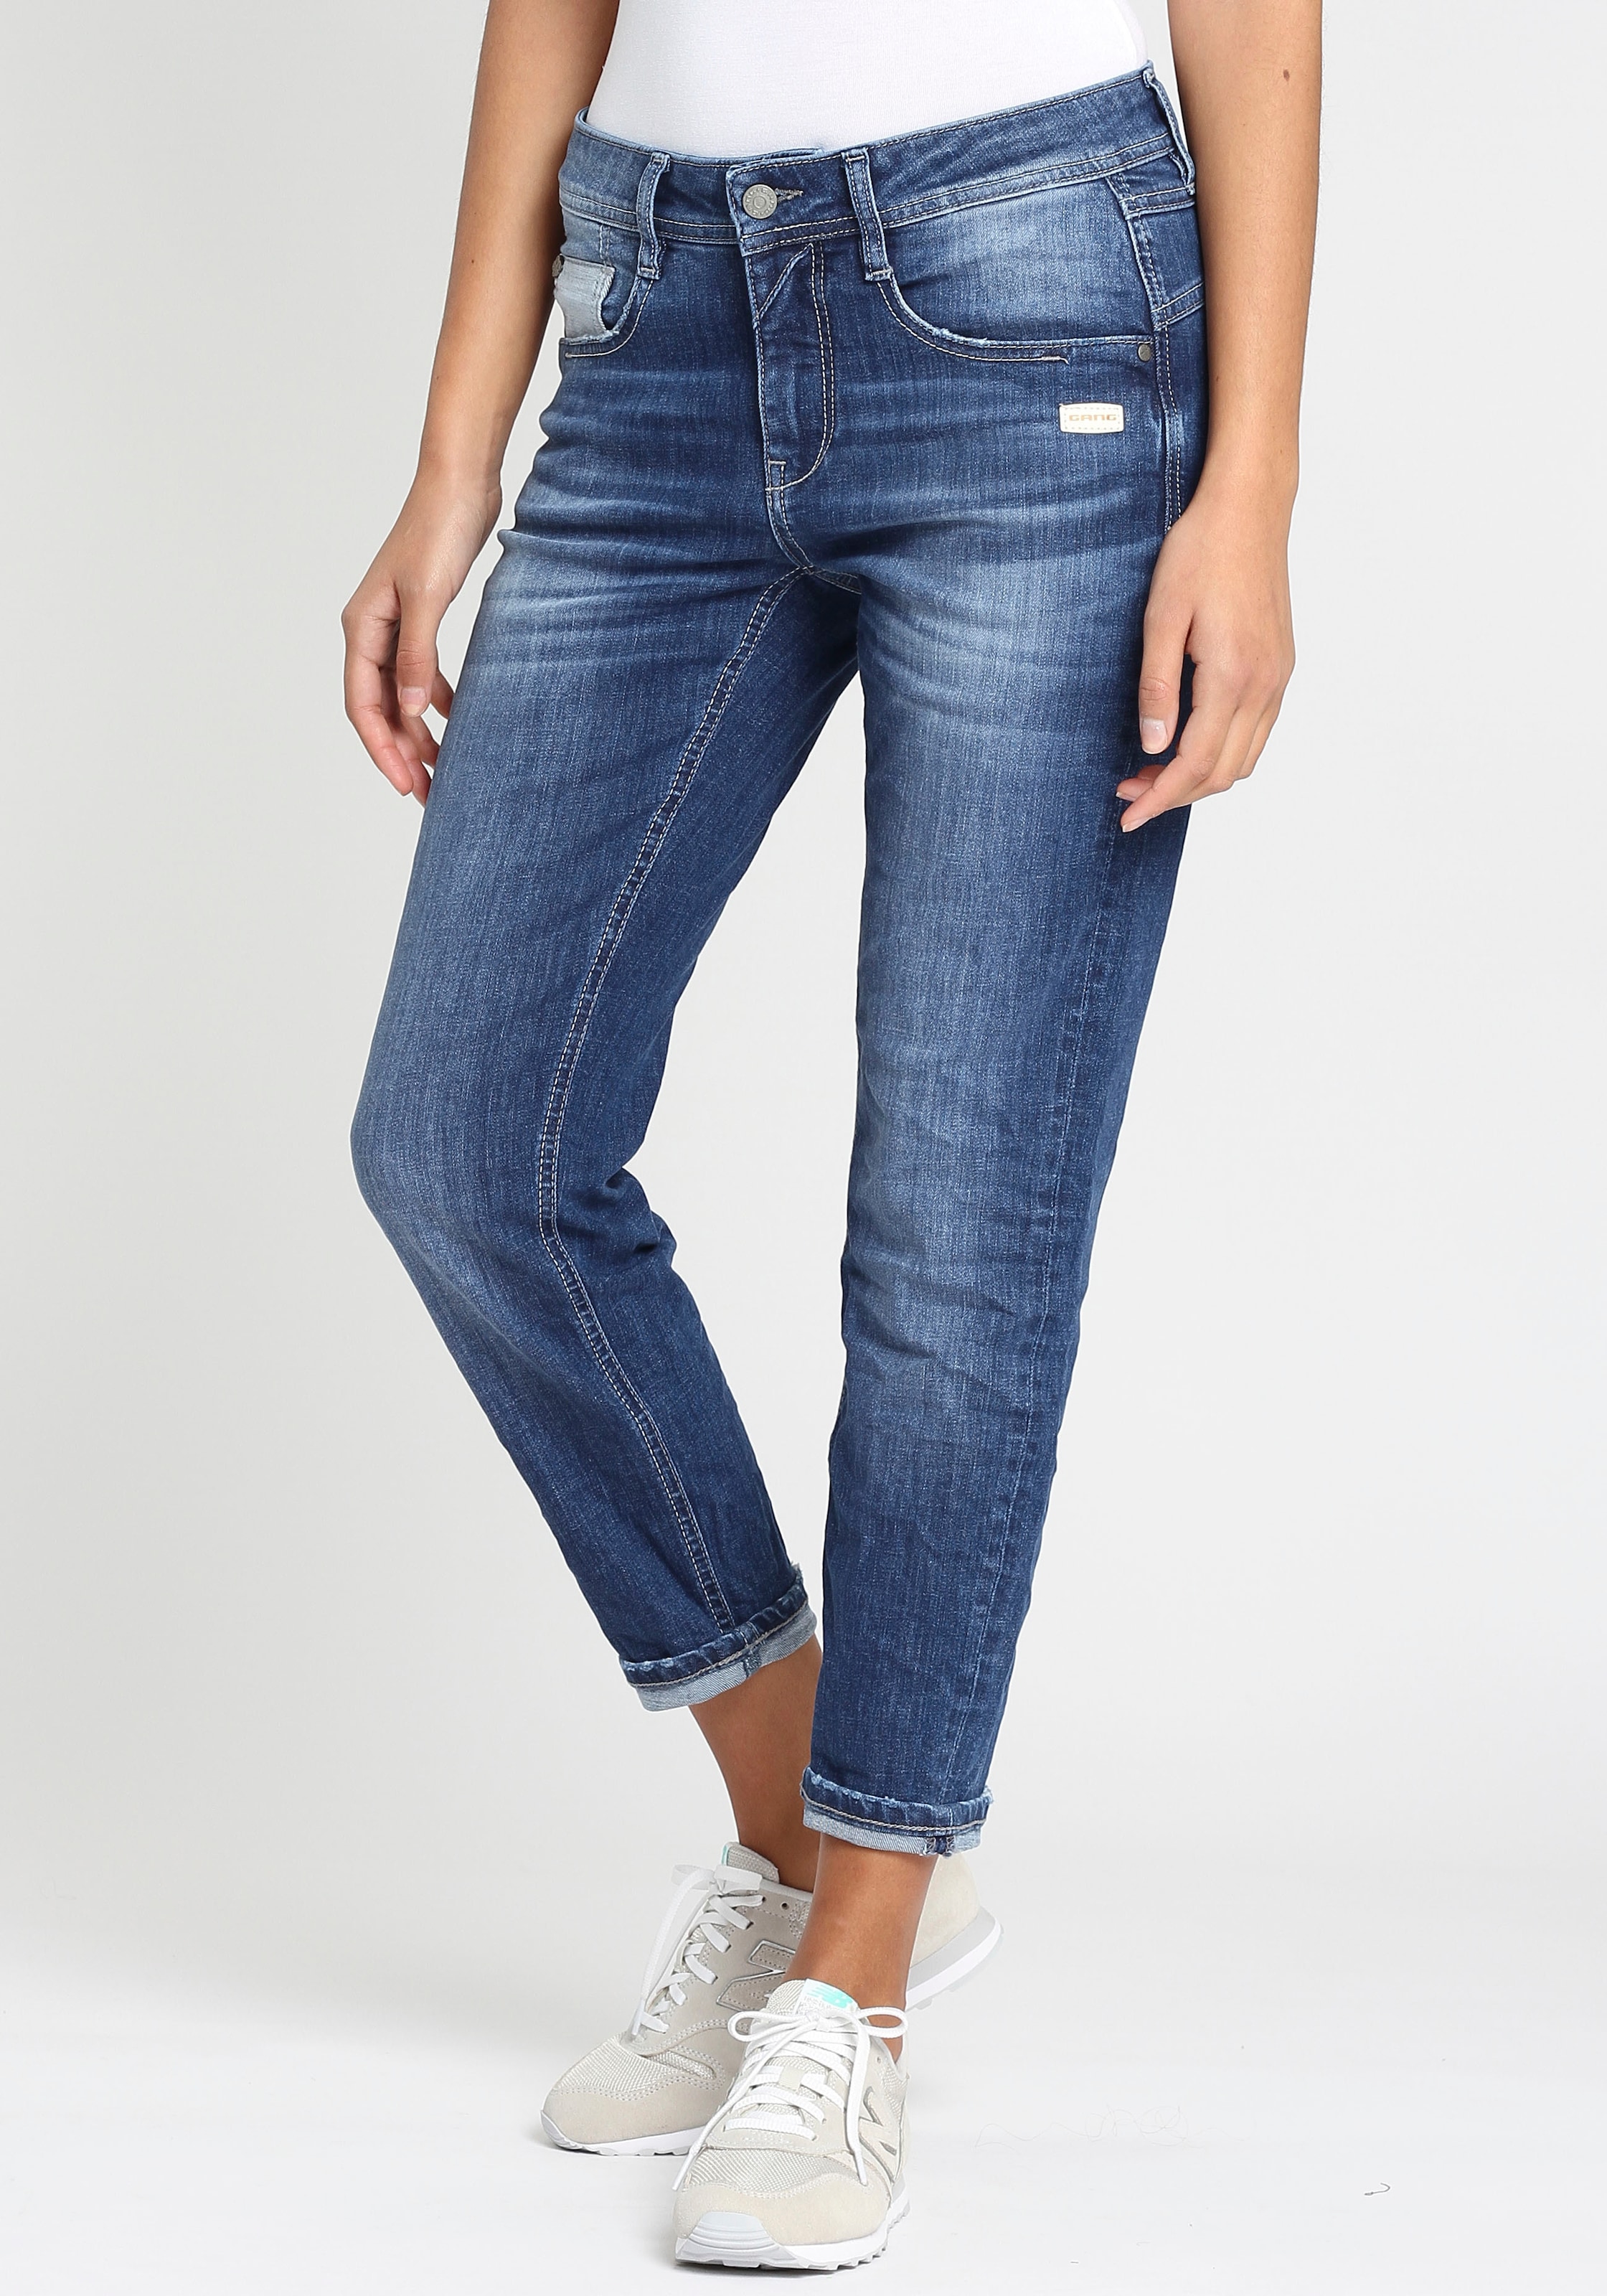 GANG Relax-fit-Jeans »94AMELIE CROPPED« kaufen | BAUR